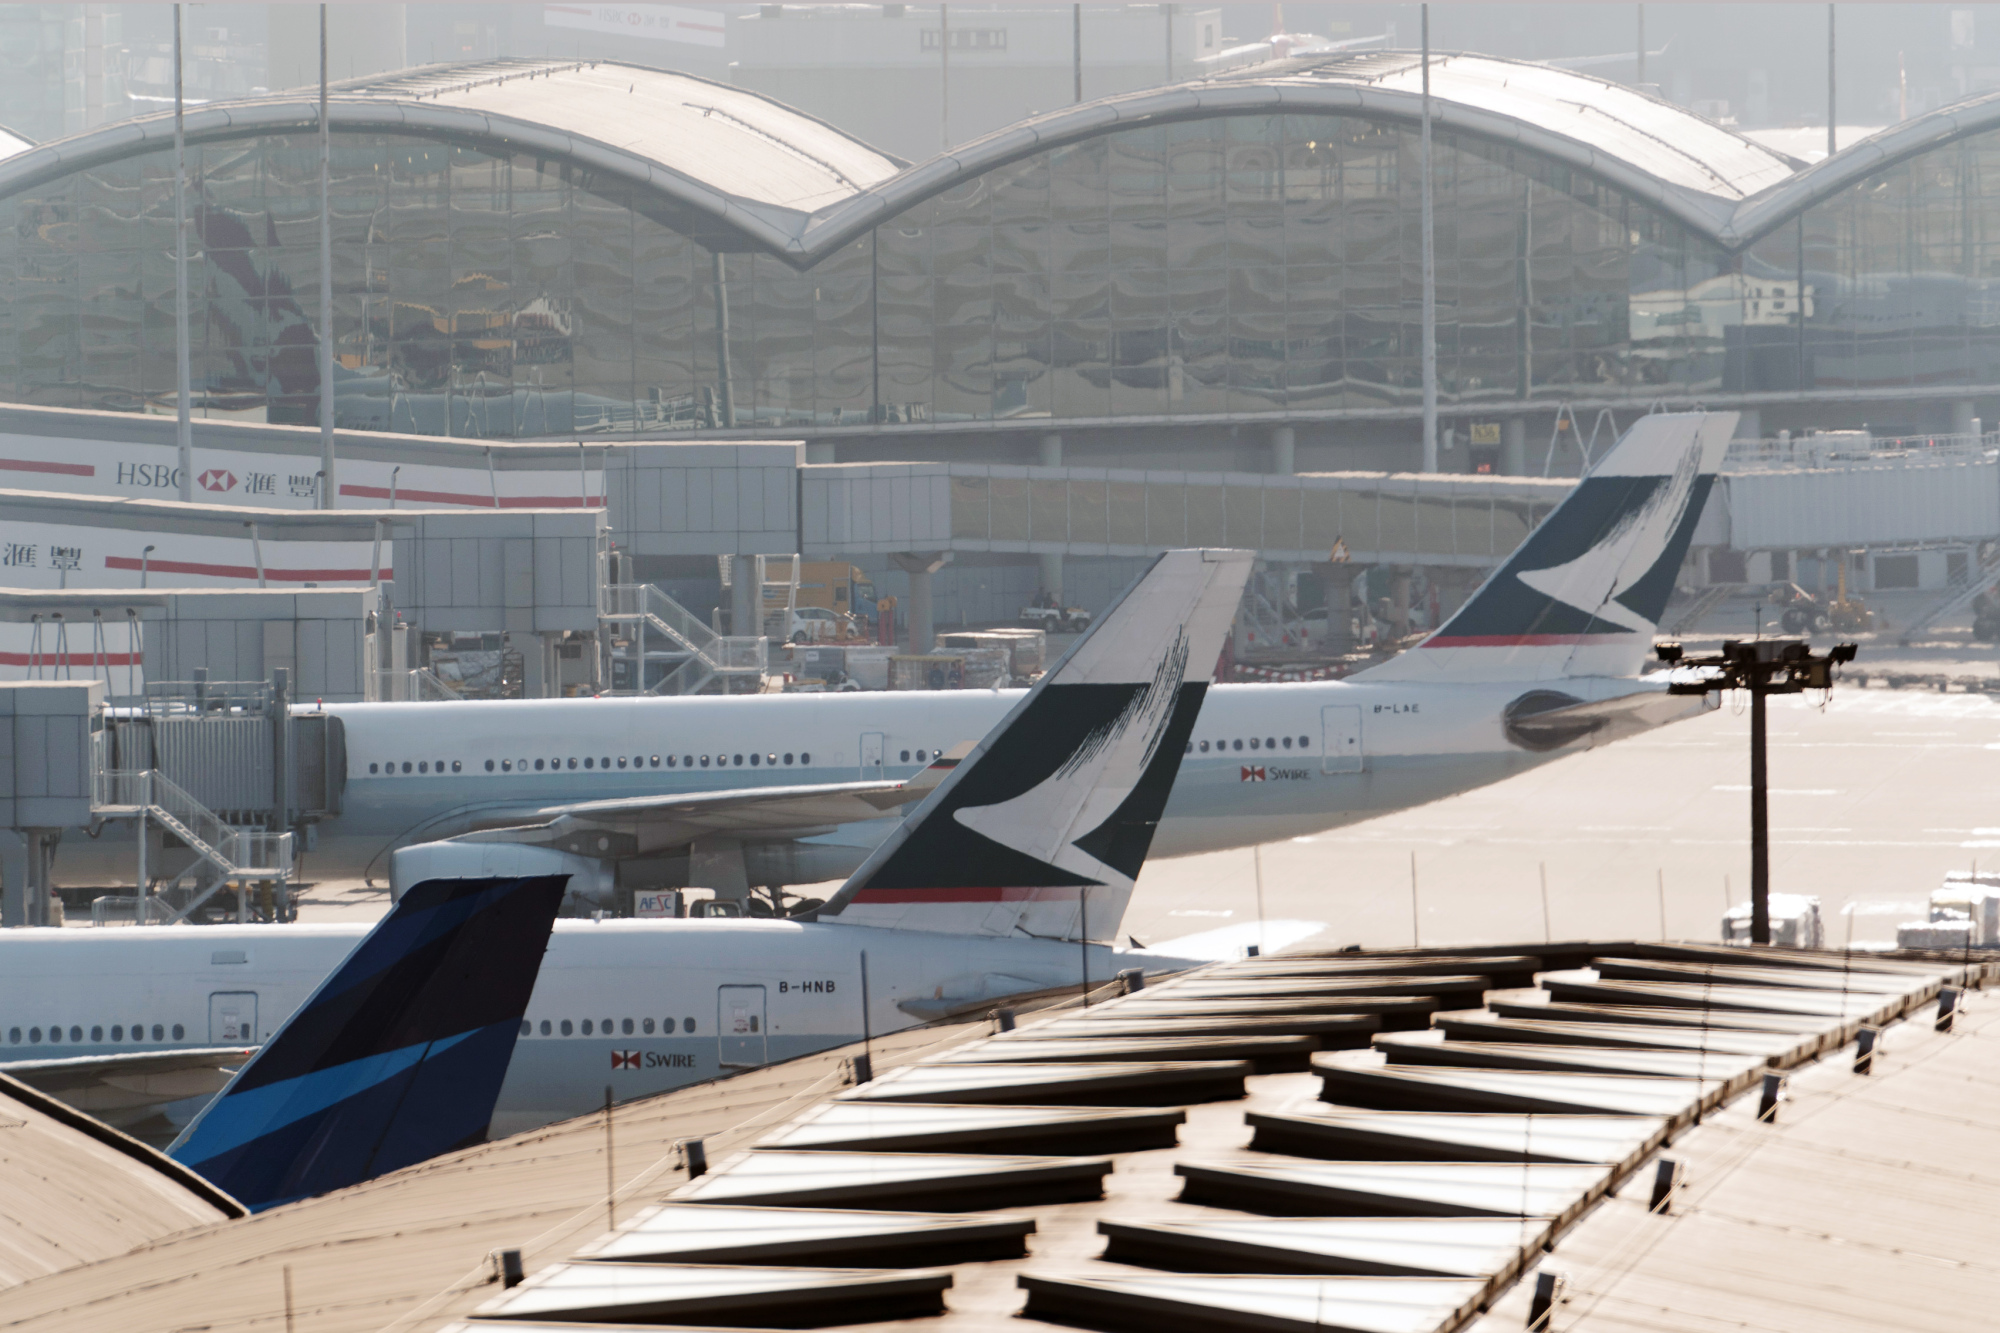 Views of Cathay Pacific Aircraft Ahead of Earnings Announcements